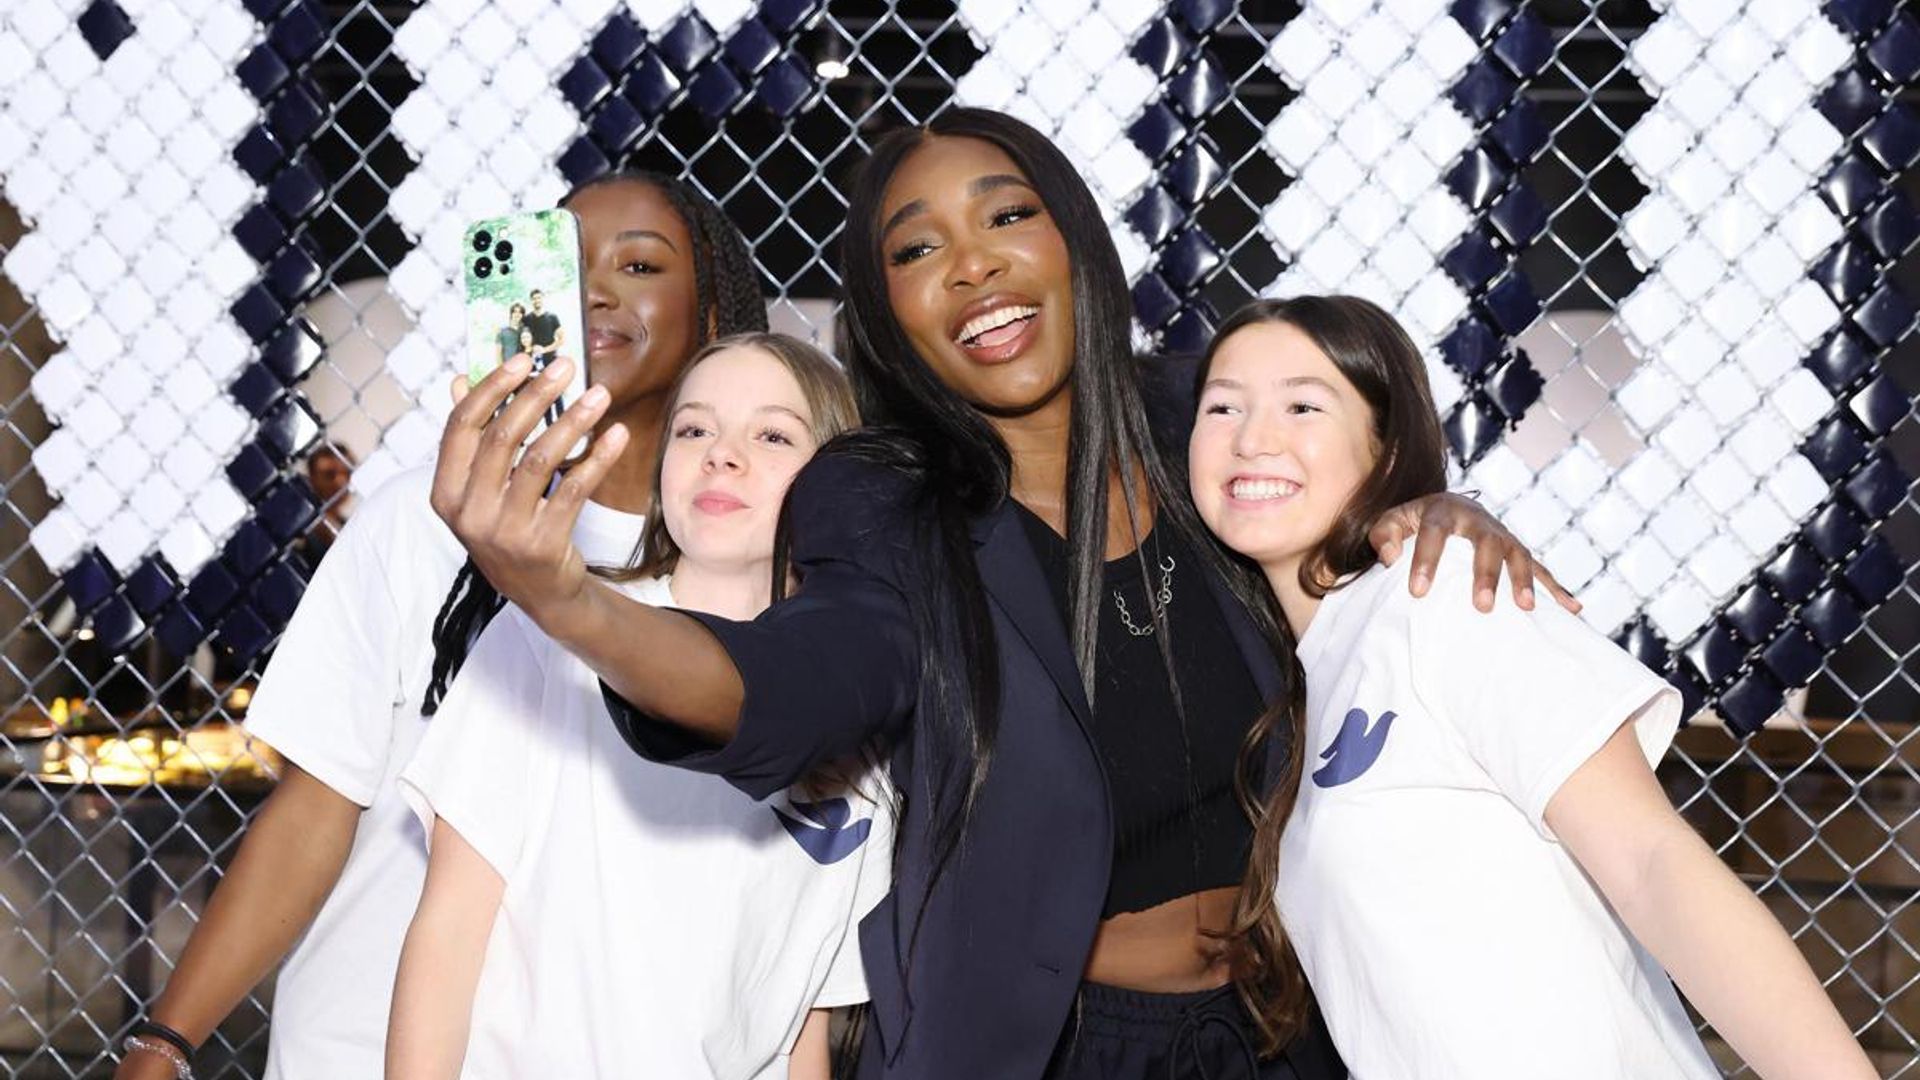 Venus Williams and Laurie Hernandez encourage body confidence in young people involved in sports